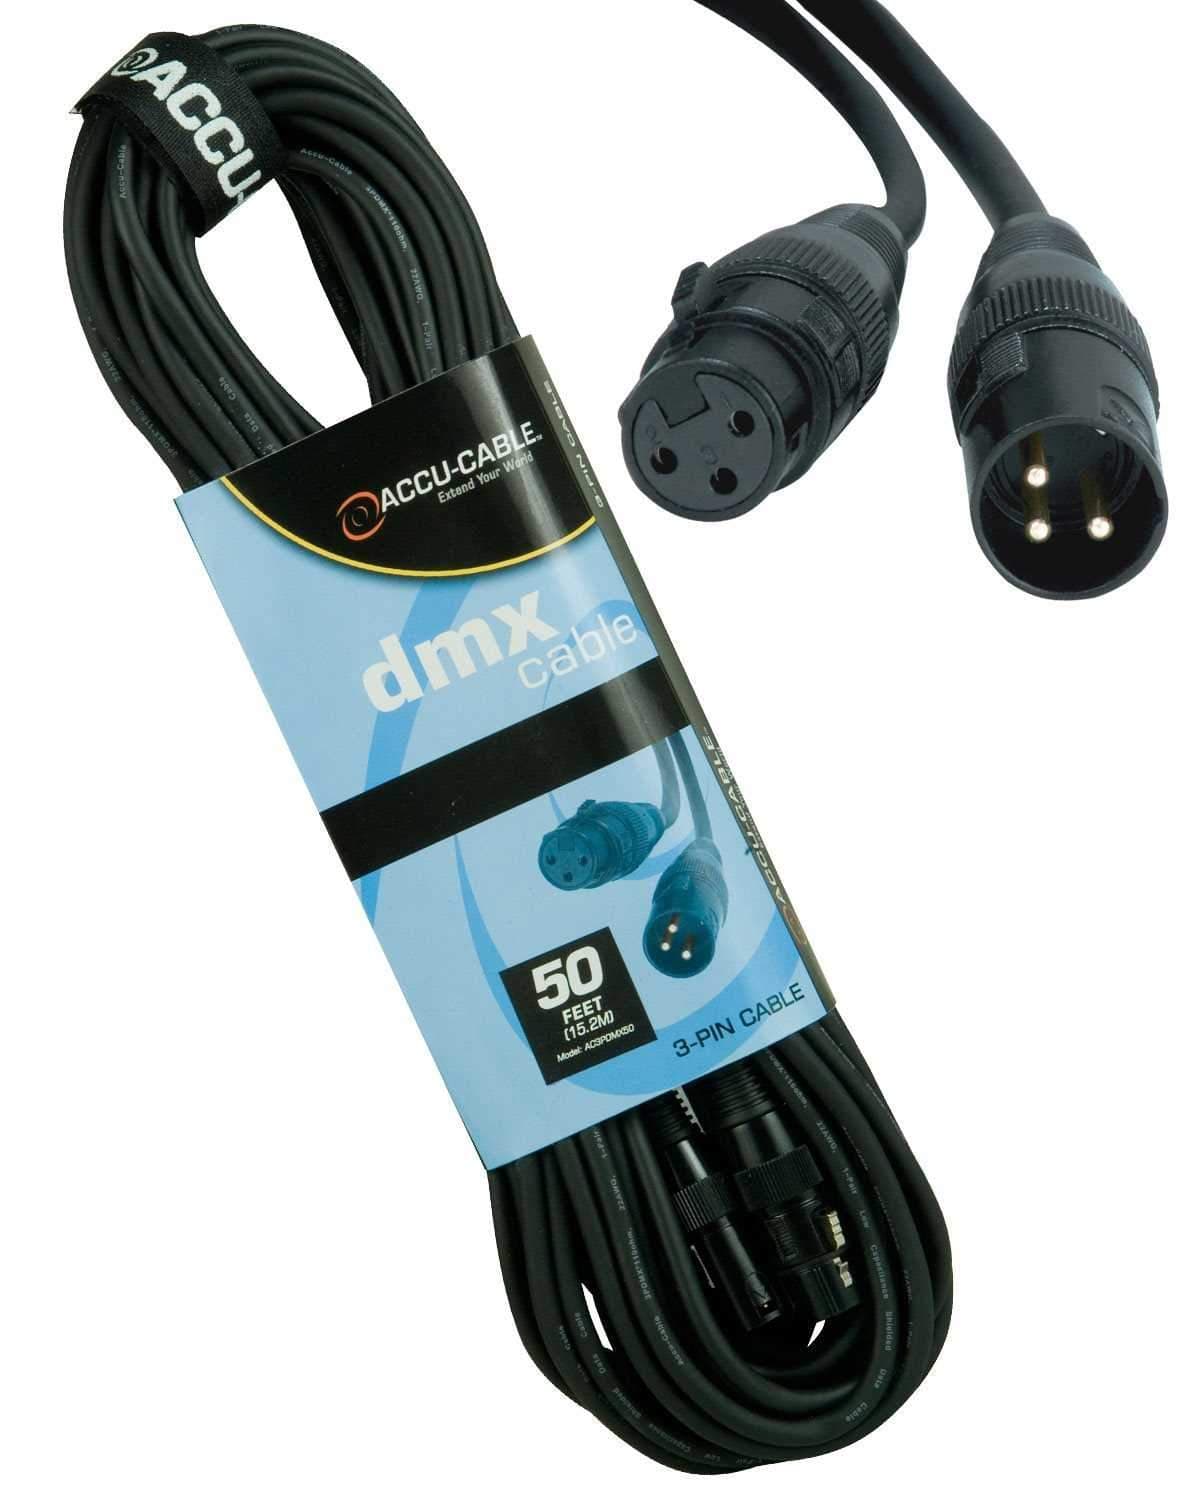 Accu-Cable 3-Pin XLR (F) to XLR (M) DMX Cable 50Ft